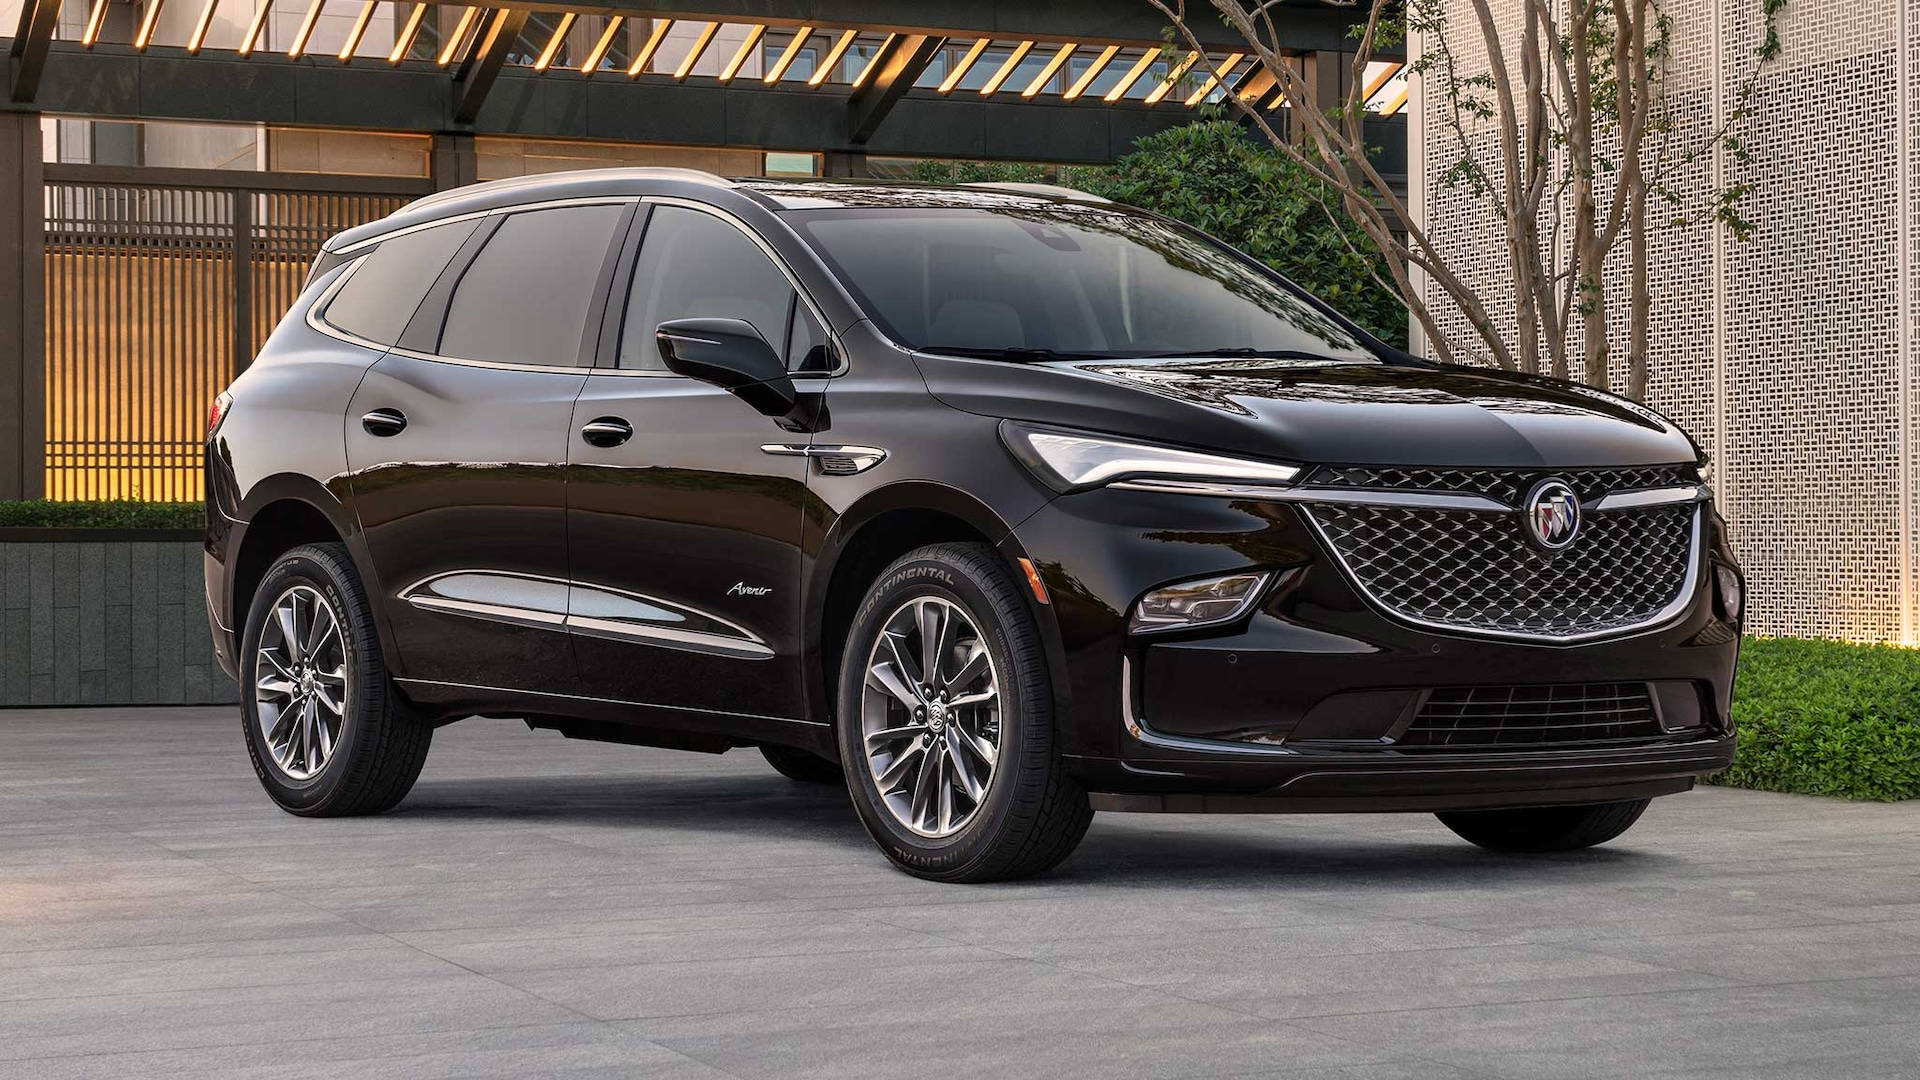 Buick Enclave Parked In Outdoor Parking Lot Background